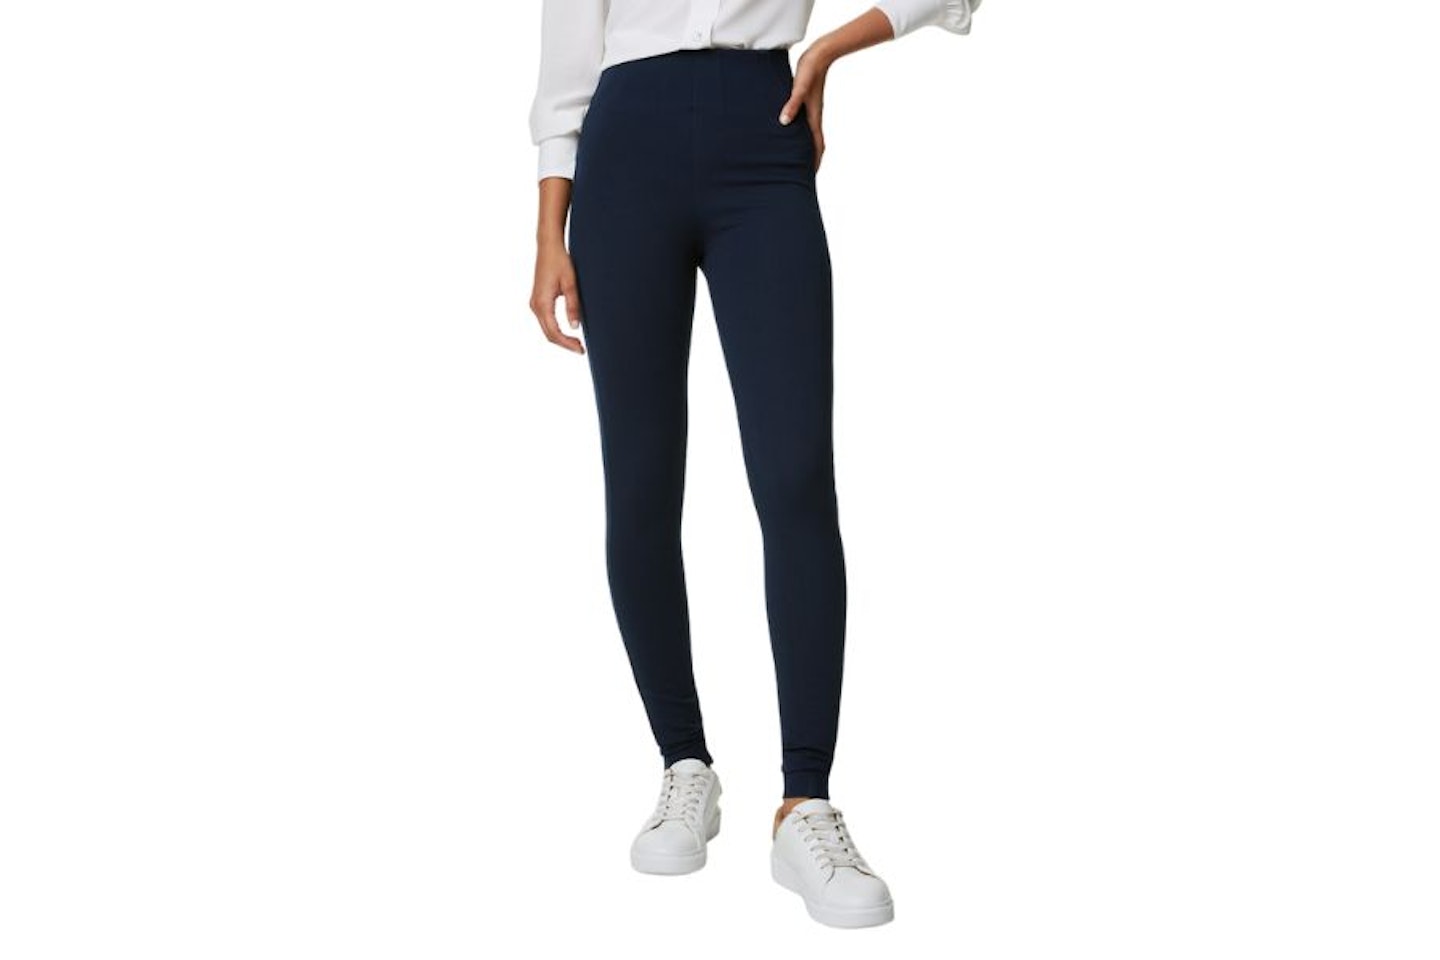 M and S Magic Shaping High Waisted Leggings